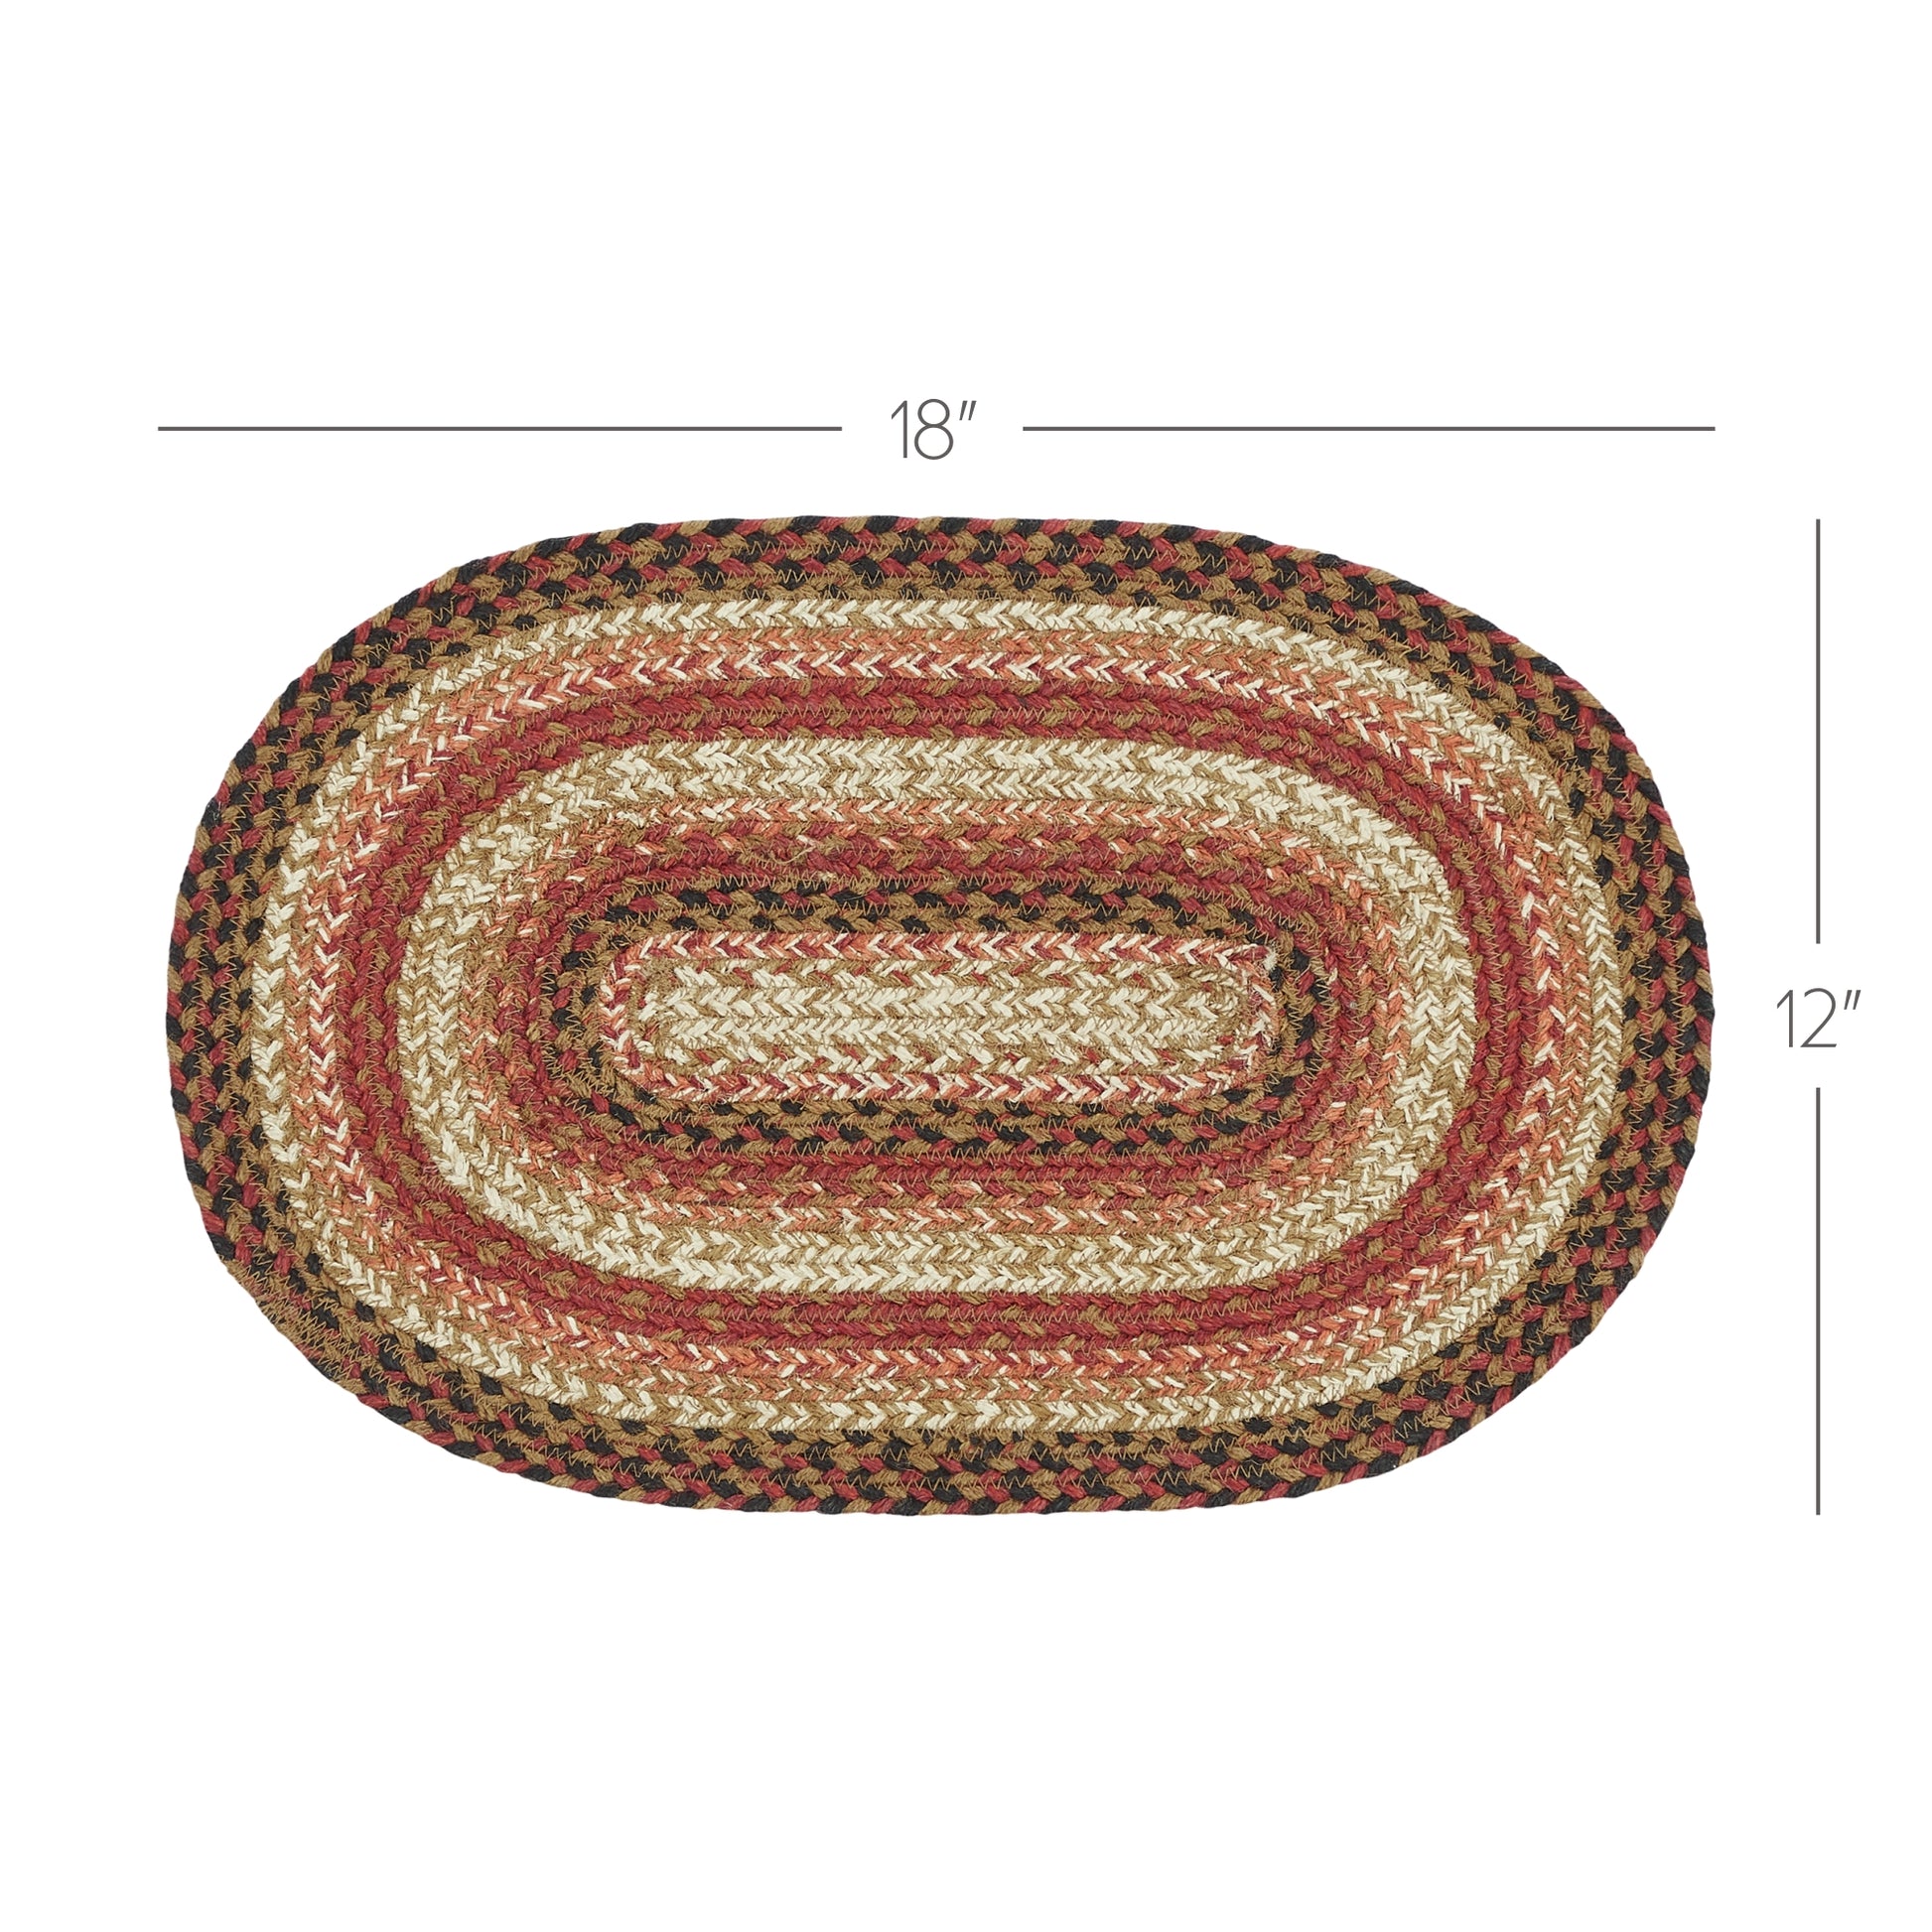 67128-Ginger-Spice-Jute-Oval-Placemat-12x18-image-1